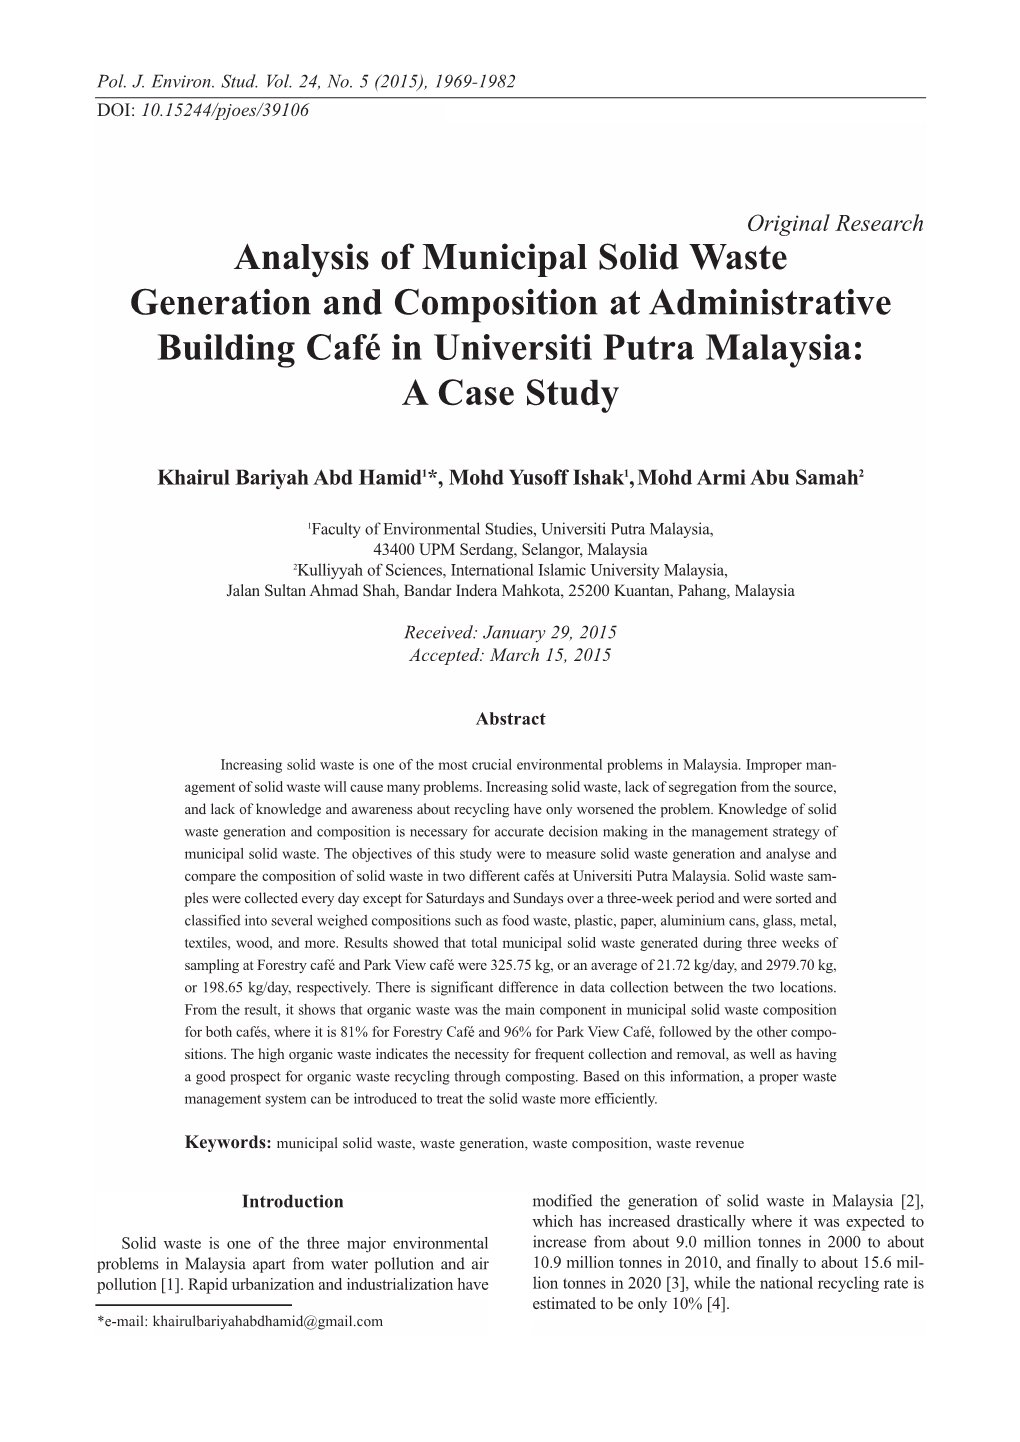 Analysis of Municipal Solid Waste Generation and Composition at Administrative Building Café in Universiti Putra Malaysia: a Case Study